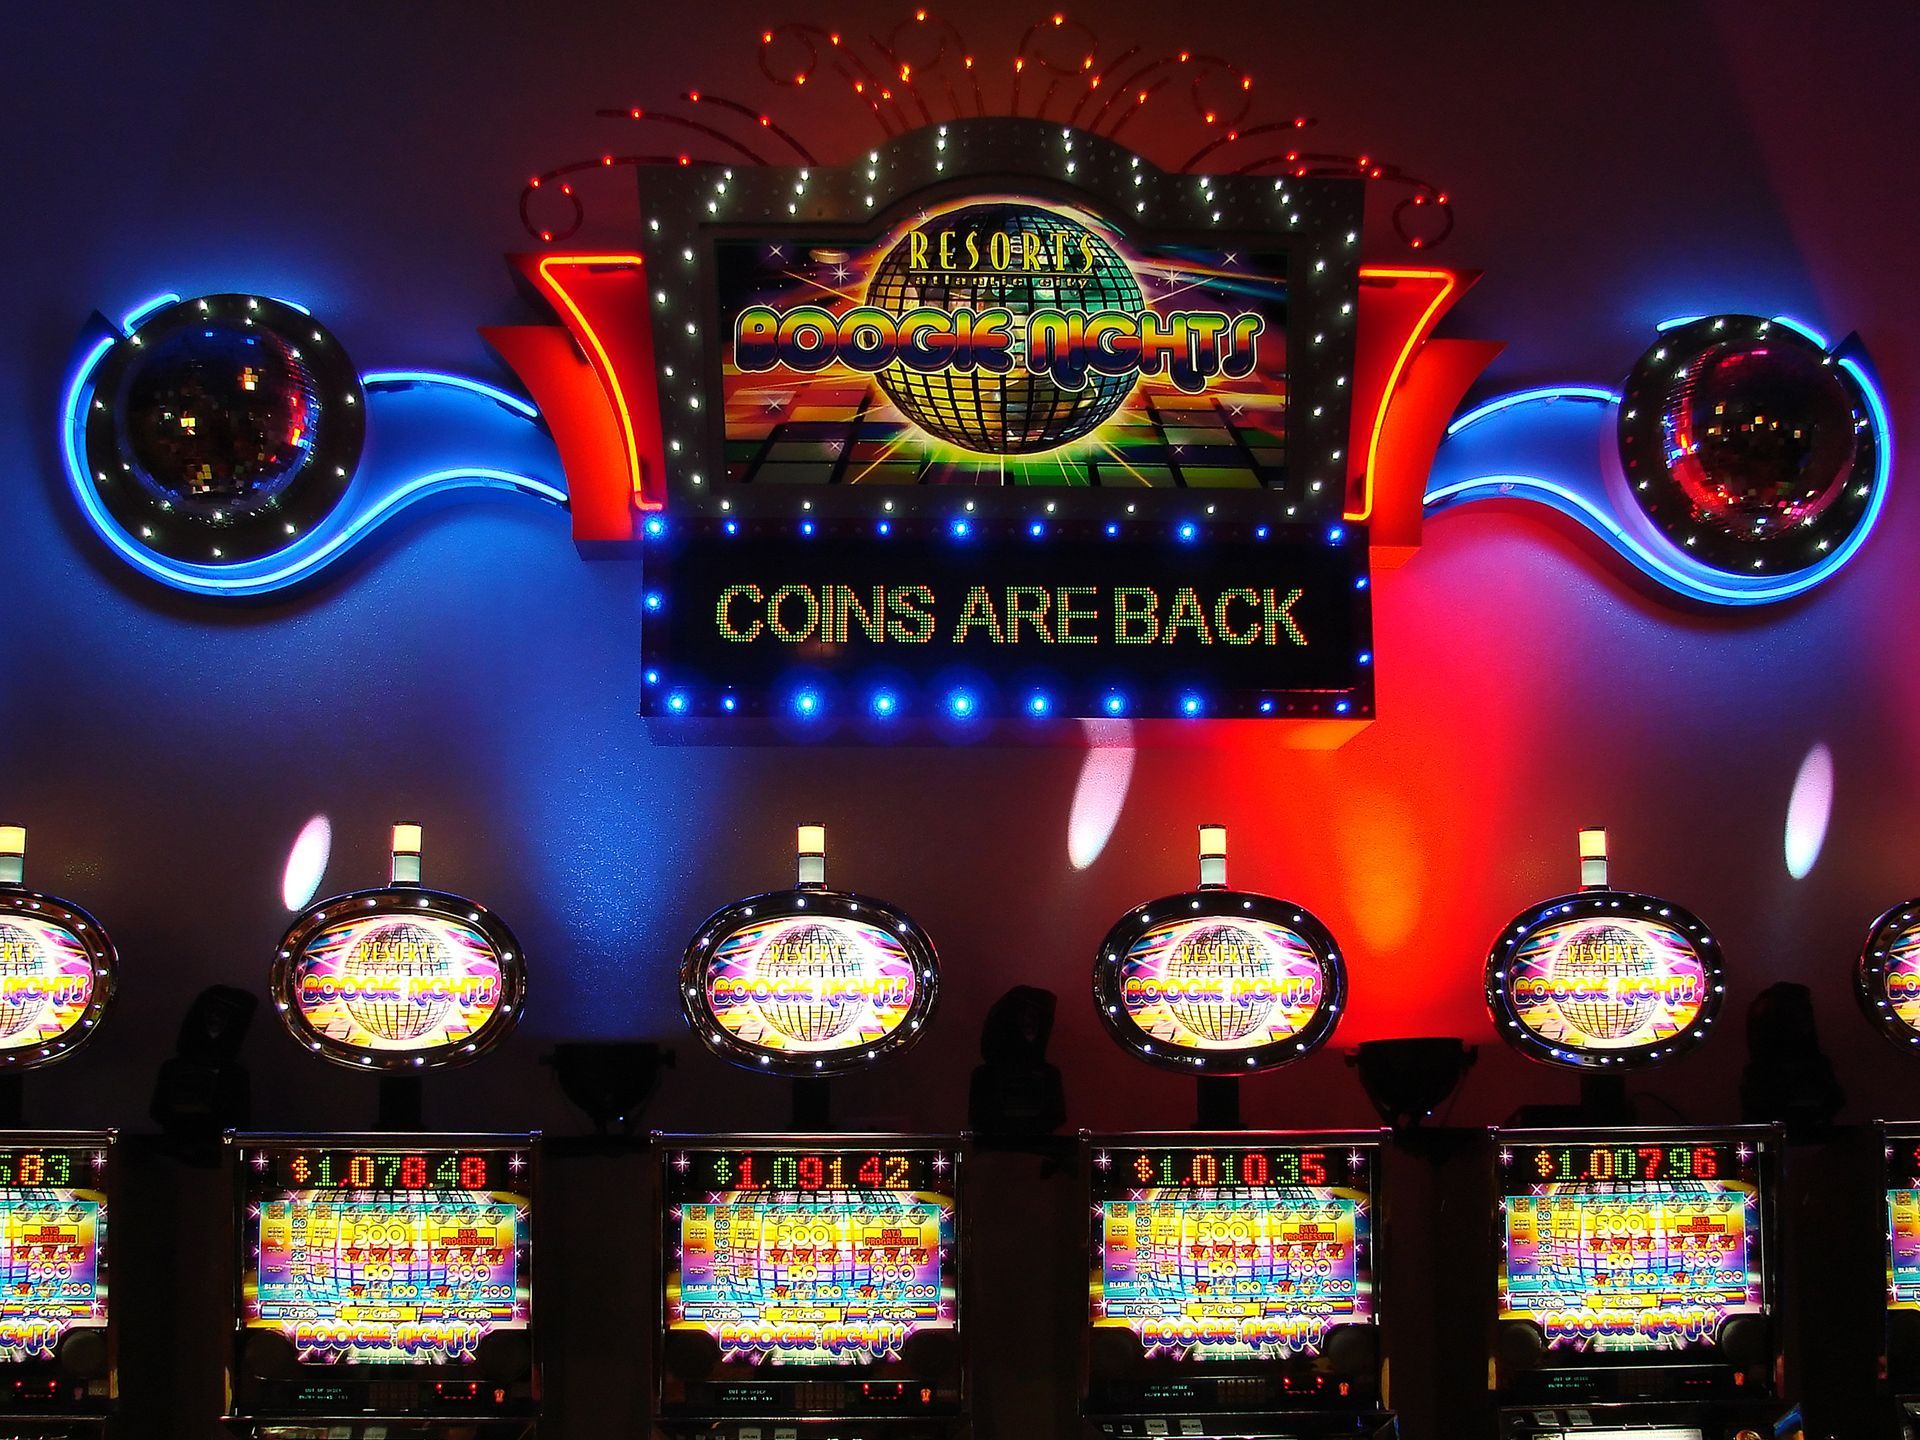 Miscellaneous: Boogie Nights Slot Machine, picture nr. 58915